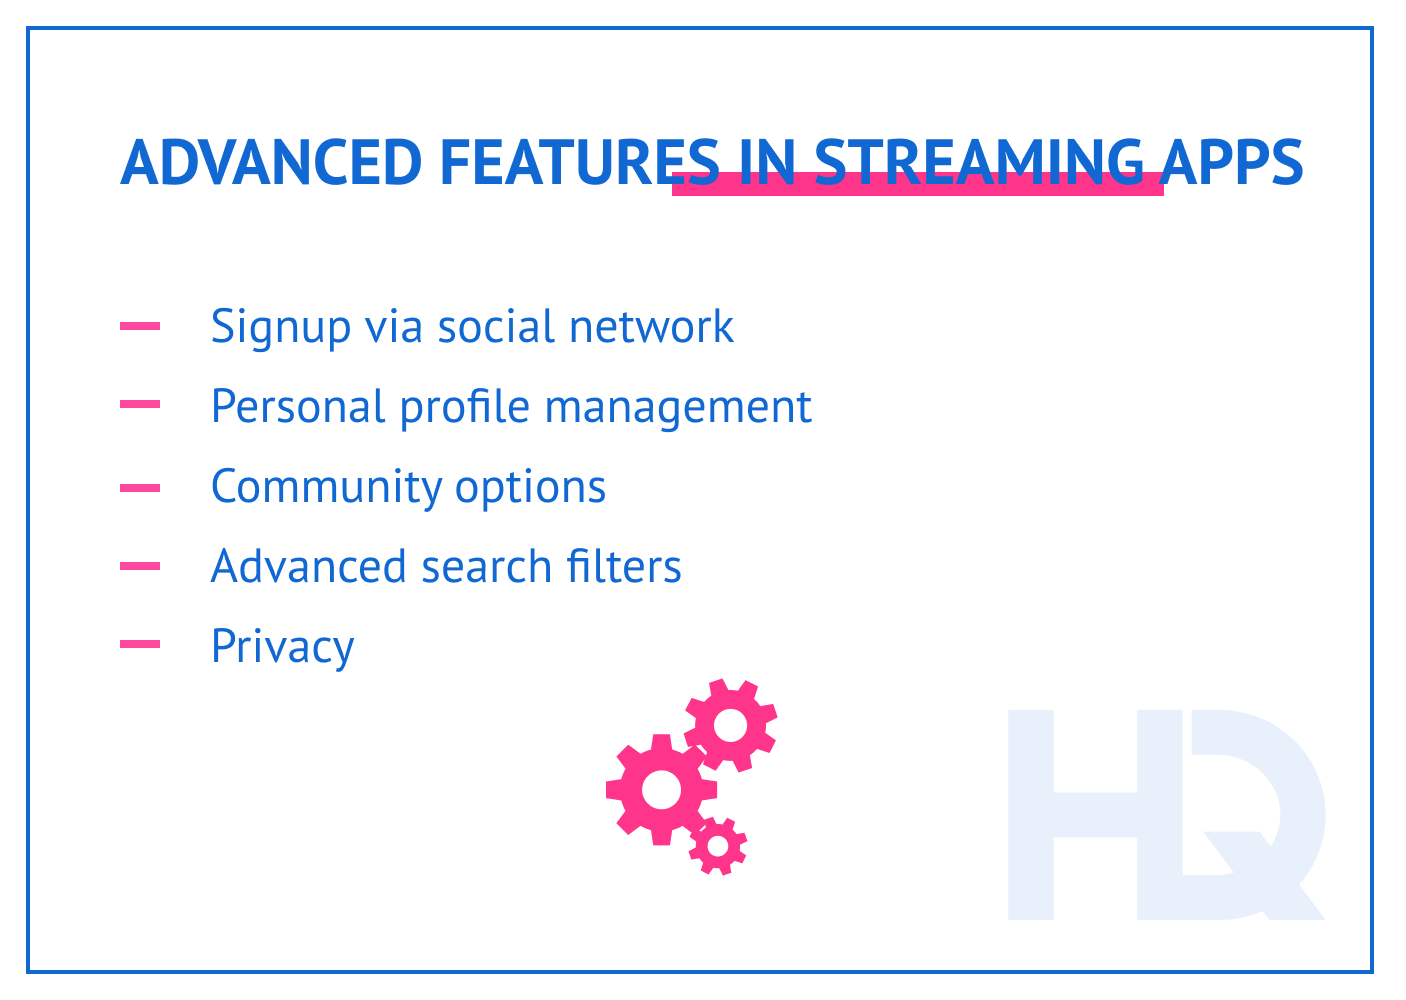 Advanced features in streaming apps.